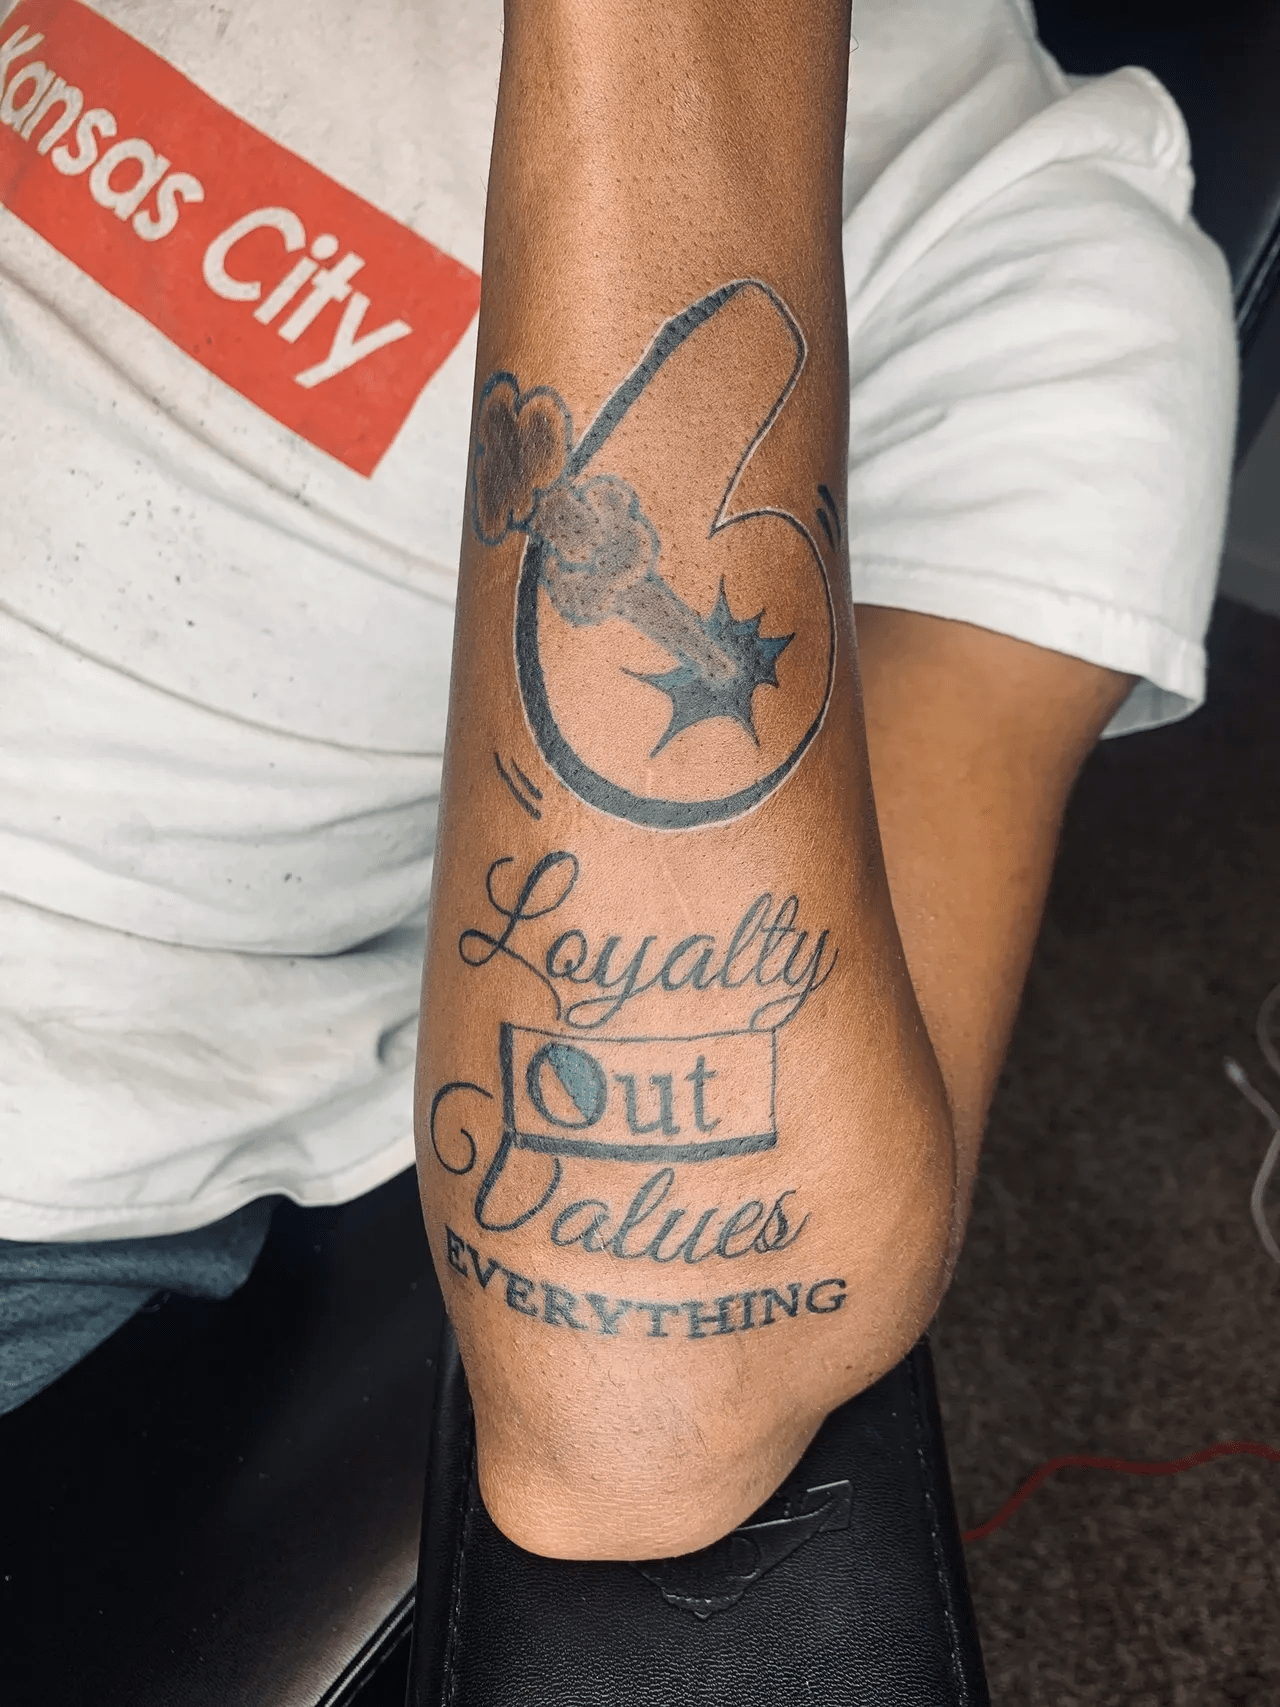 Loyalty OutValues Everything  tattoo words download free scetch